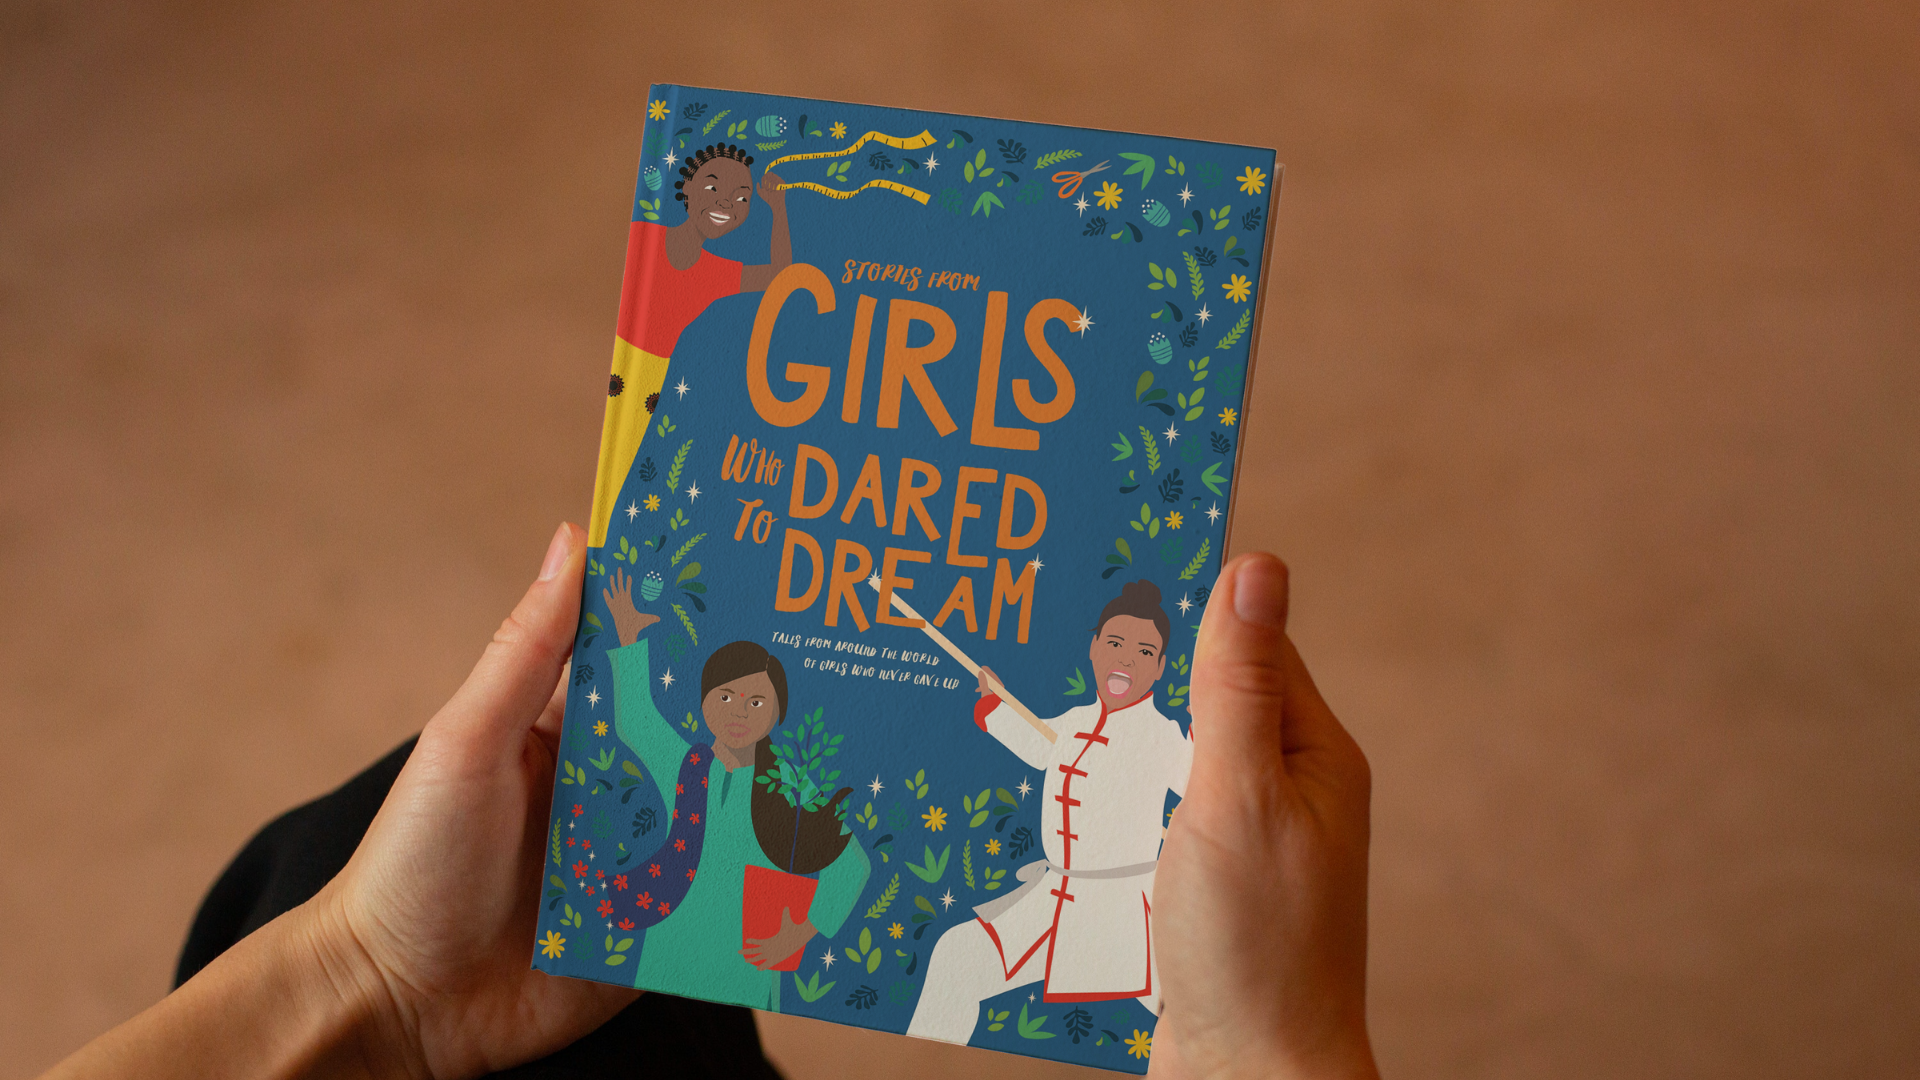 Hands hold a hardcover version of the book 'Stories from girls who dared to dream', with bright, bold illustrated cover